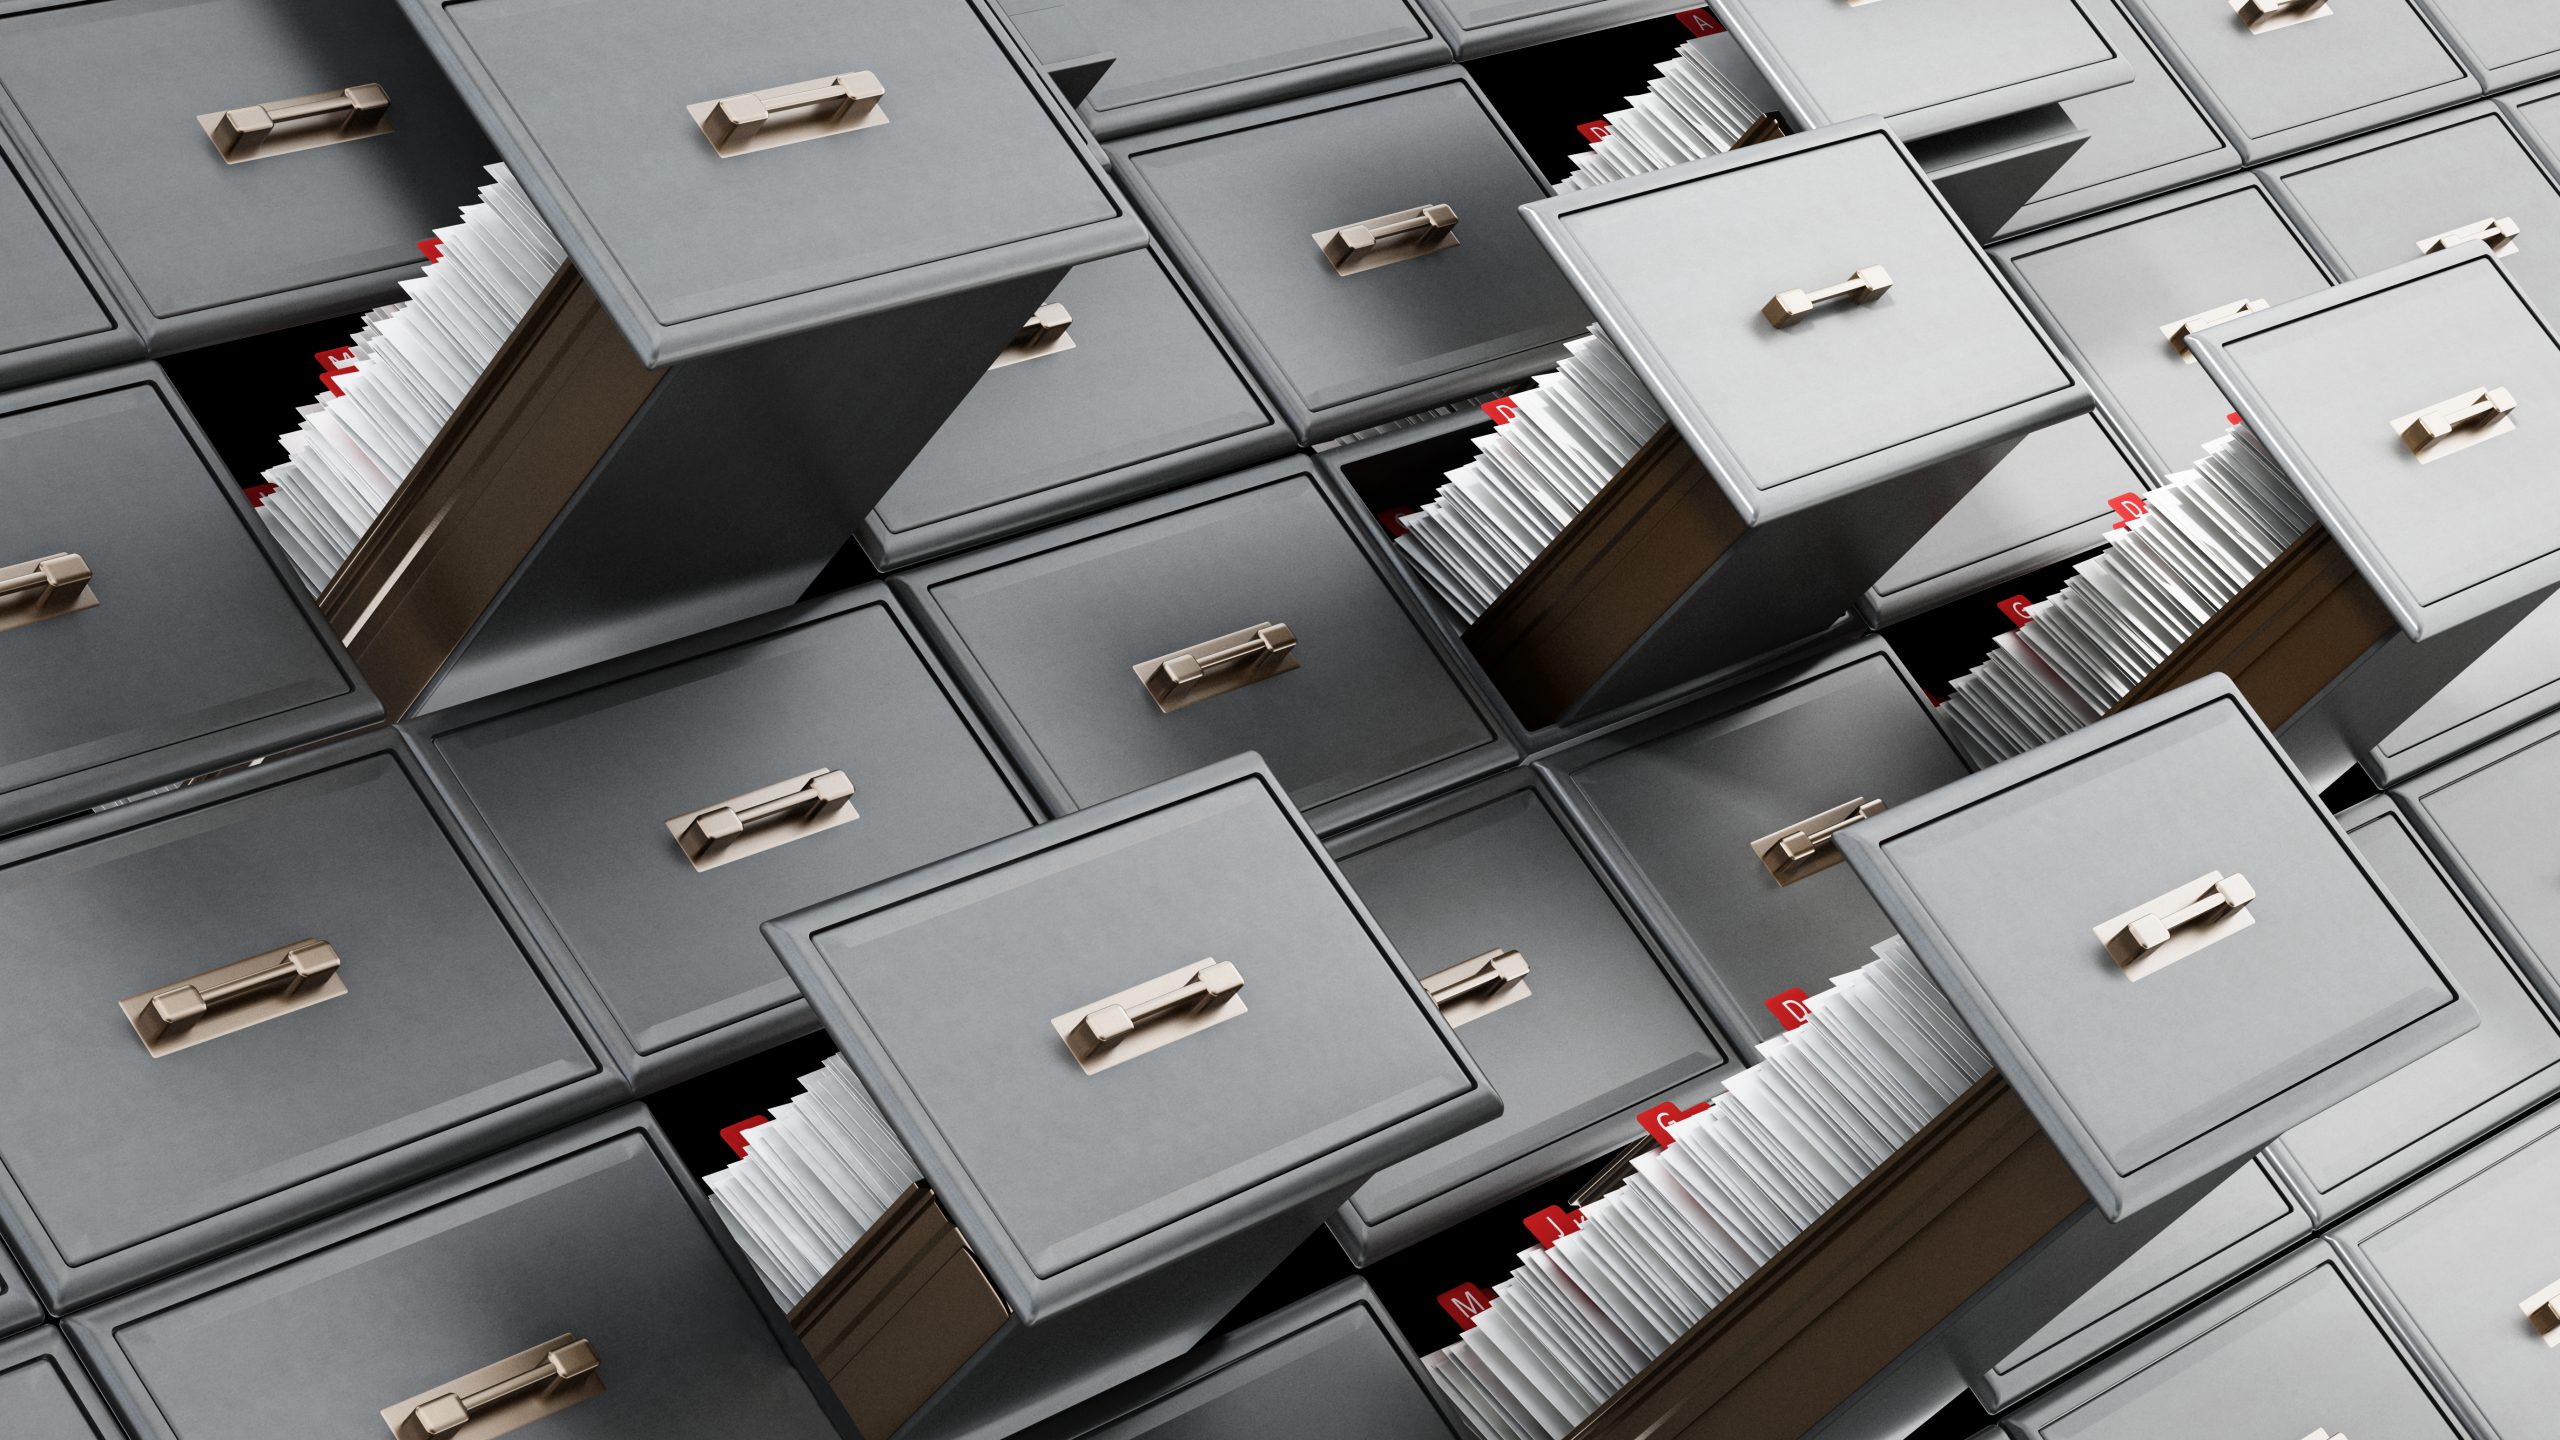 endless file cabinets with drawers open